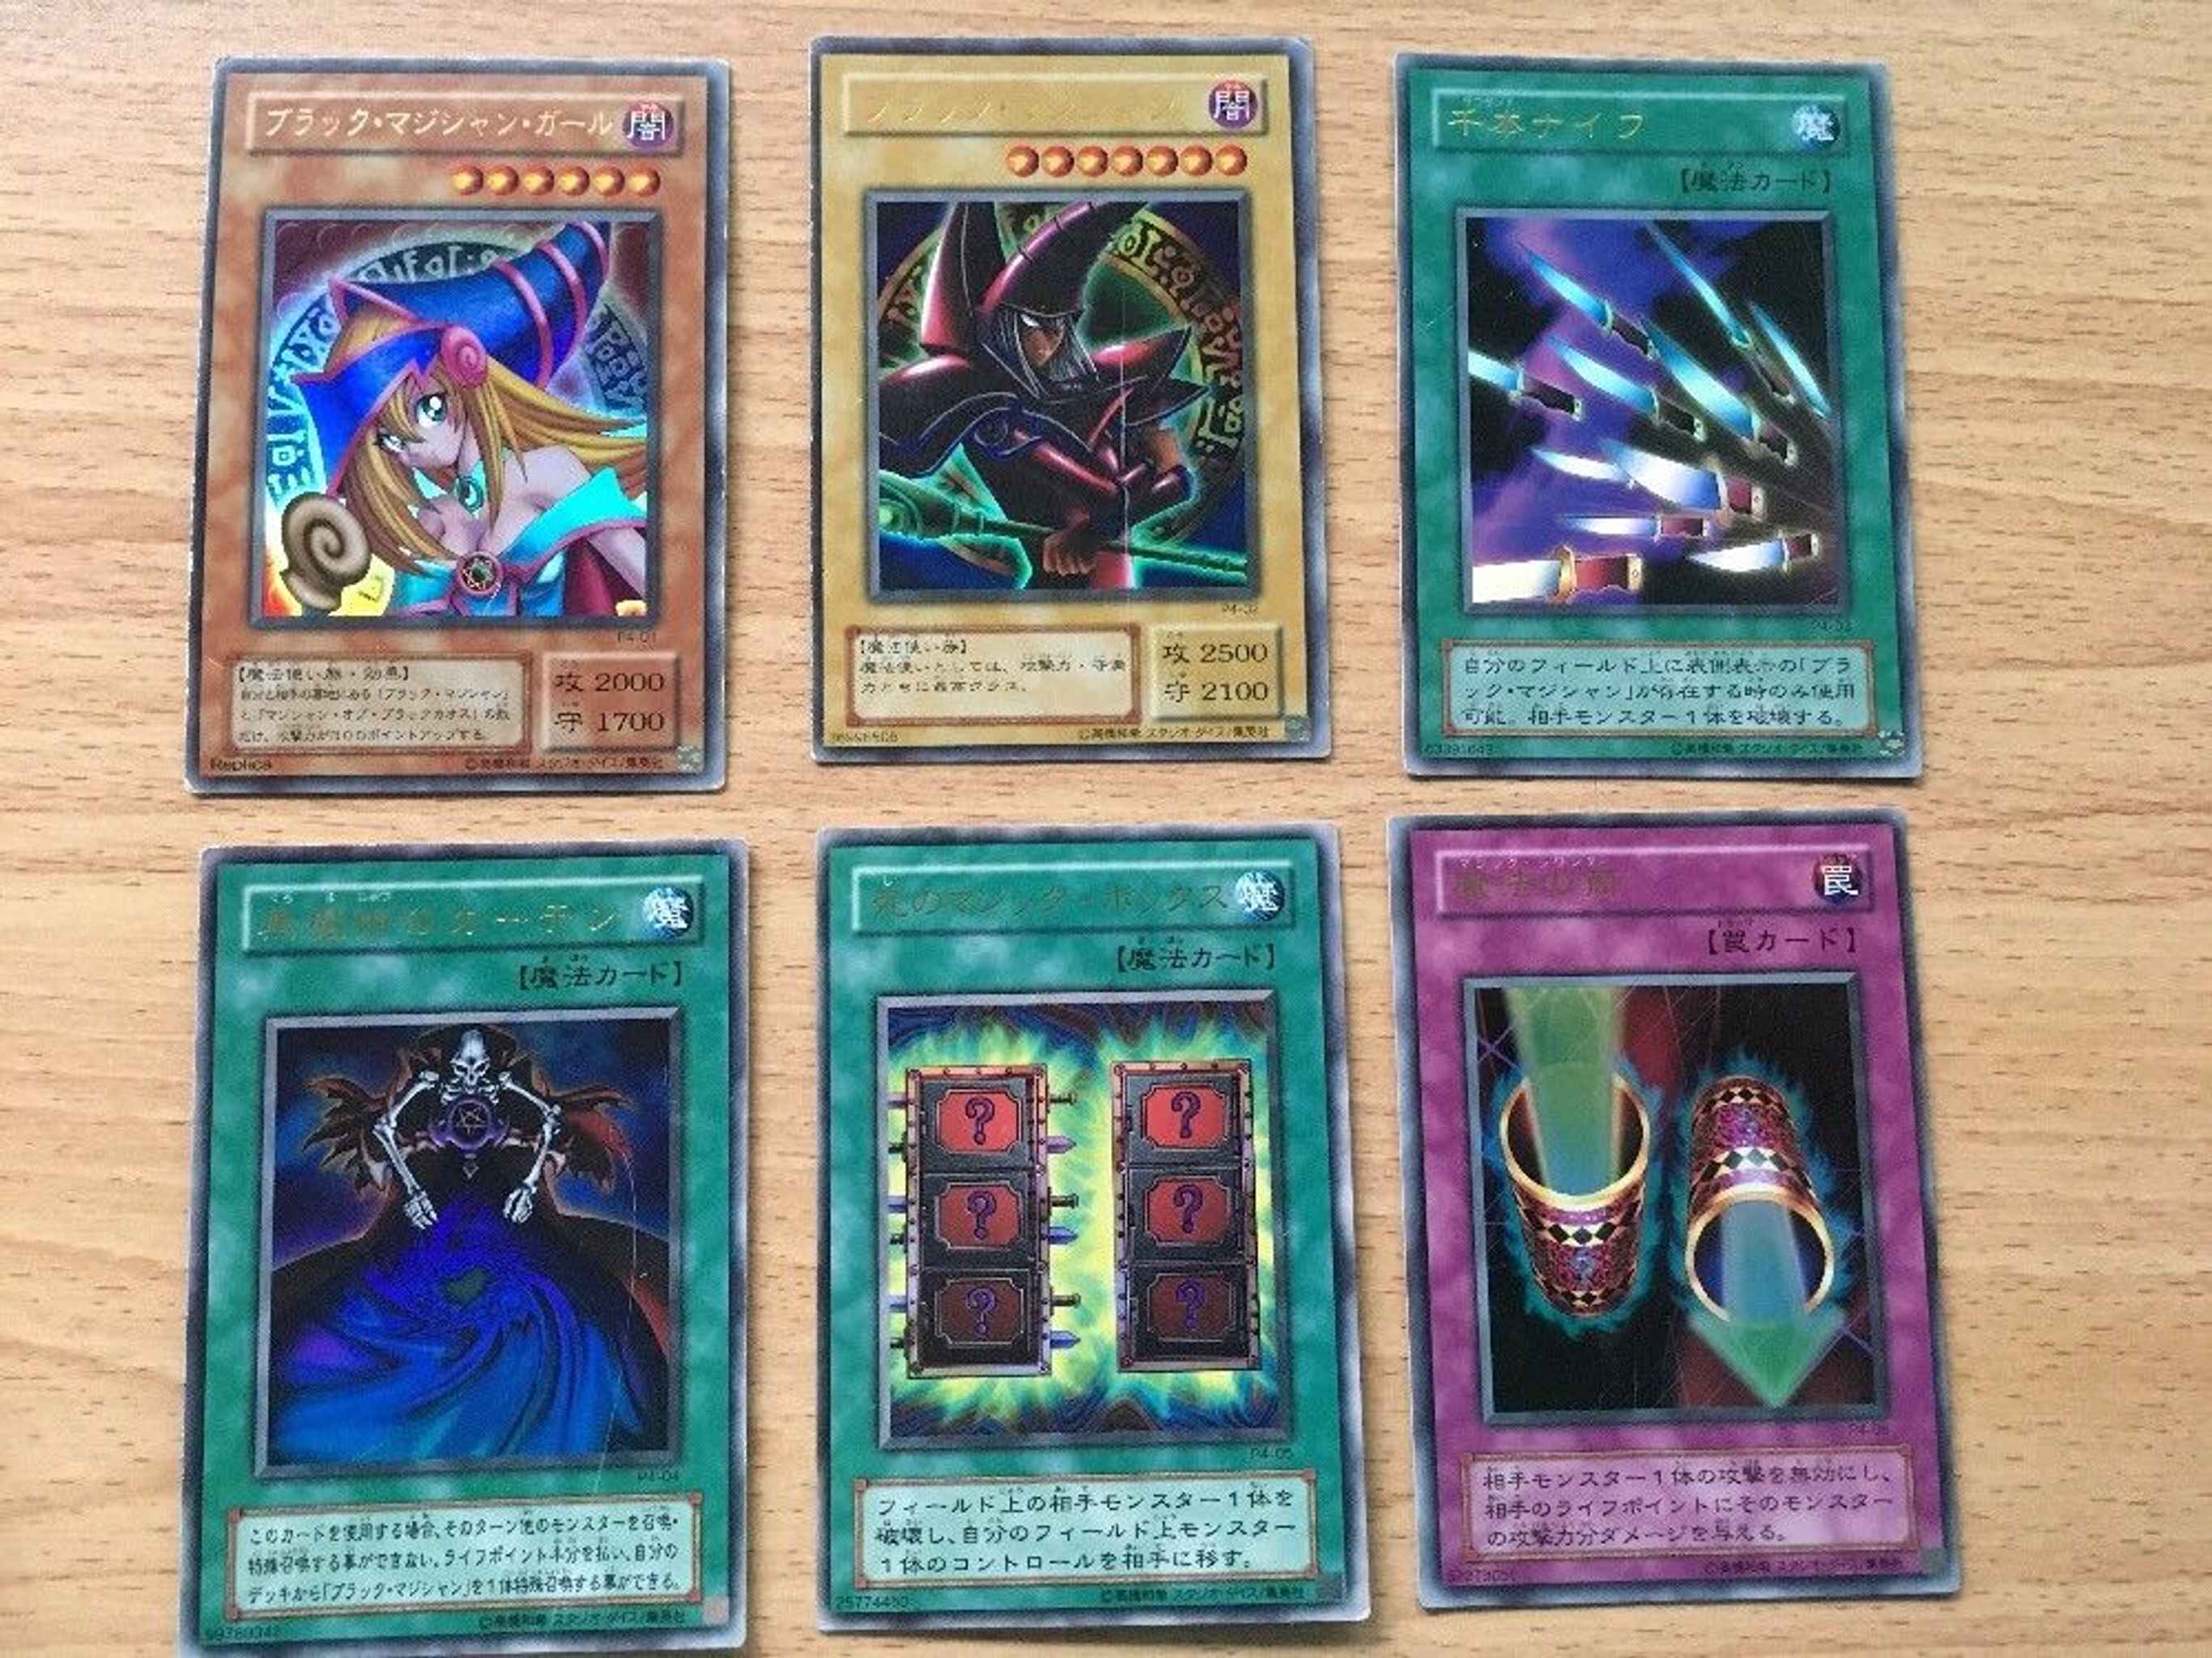 Yugioh Premium Pack 4 Complete Japanese Official Promo Set Dark Magician Girl Magician S Force Yugioh